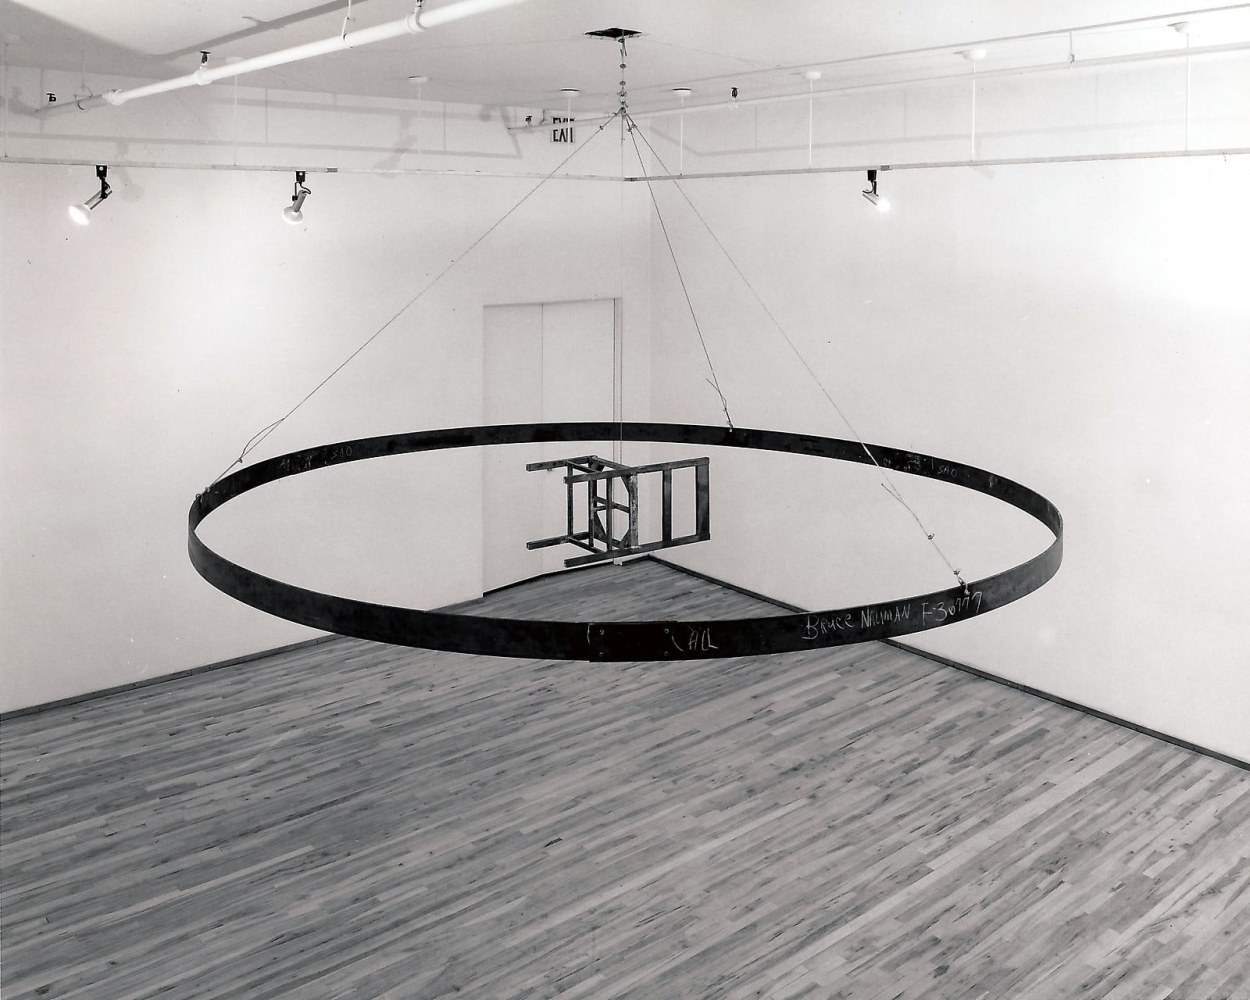 Bruce Nauman
South America Circle, 1981
steel, cast iron, and wire
168 inches (426,7 cm)
SW 82008
Collection Dia Art Foundation